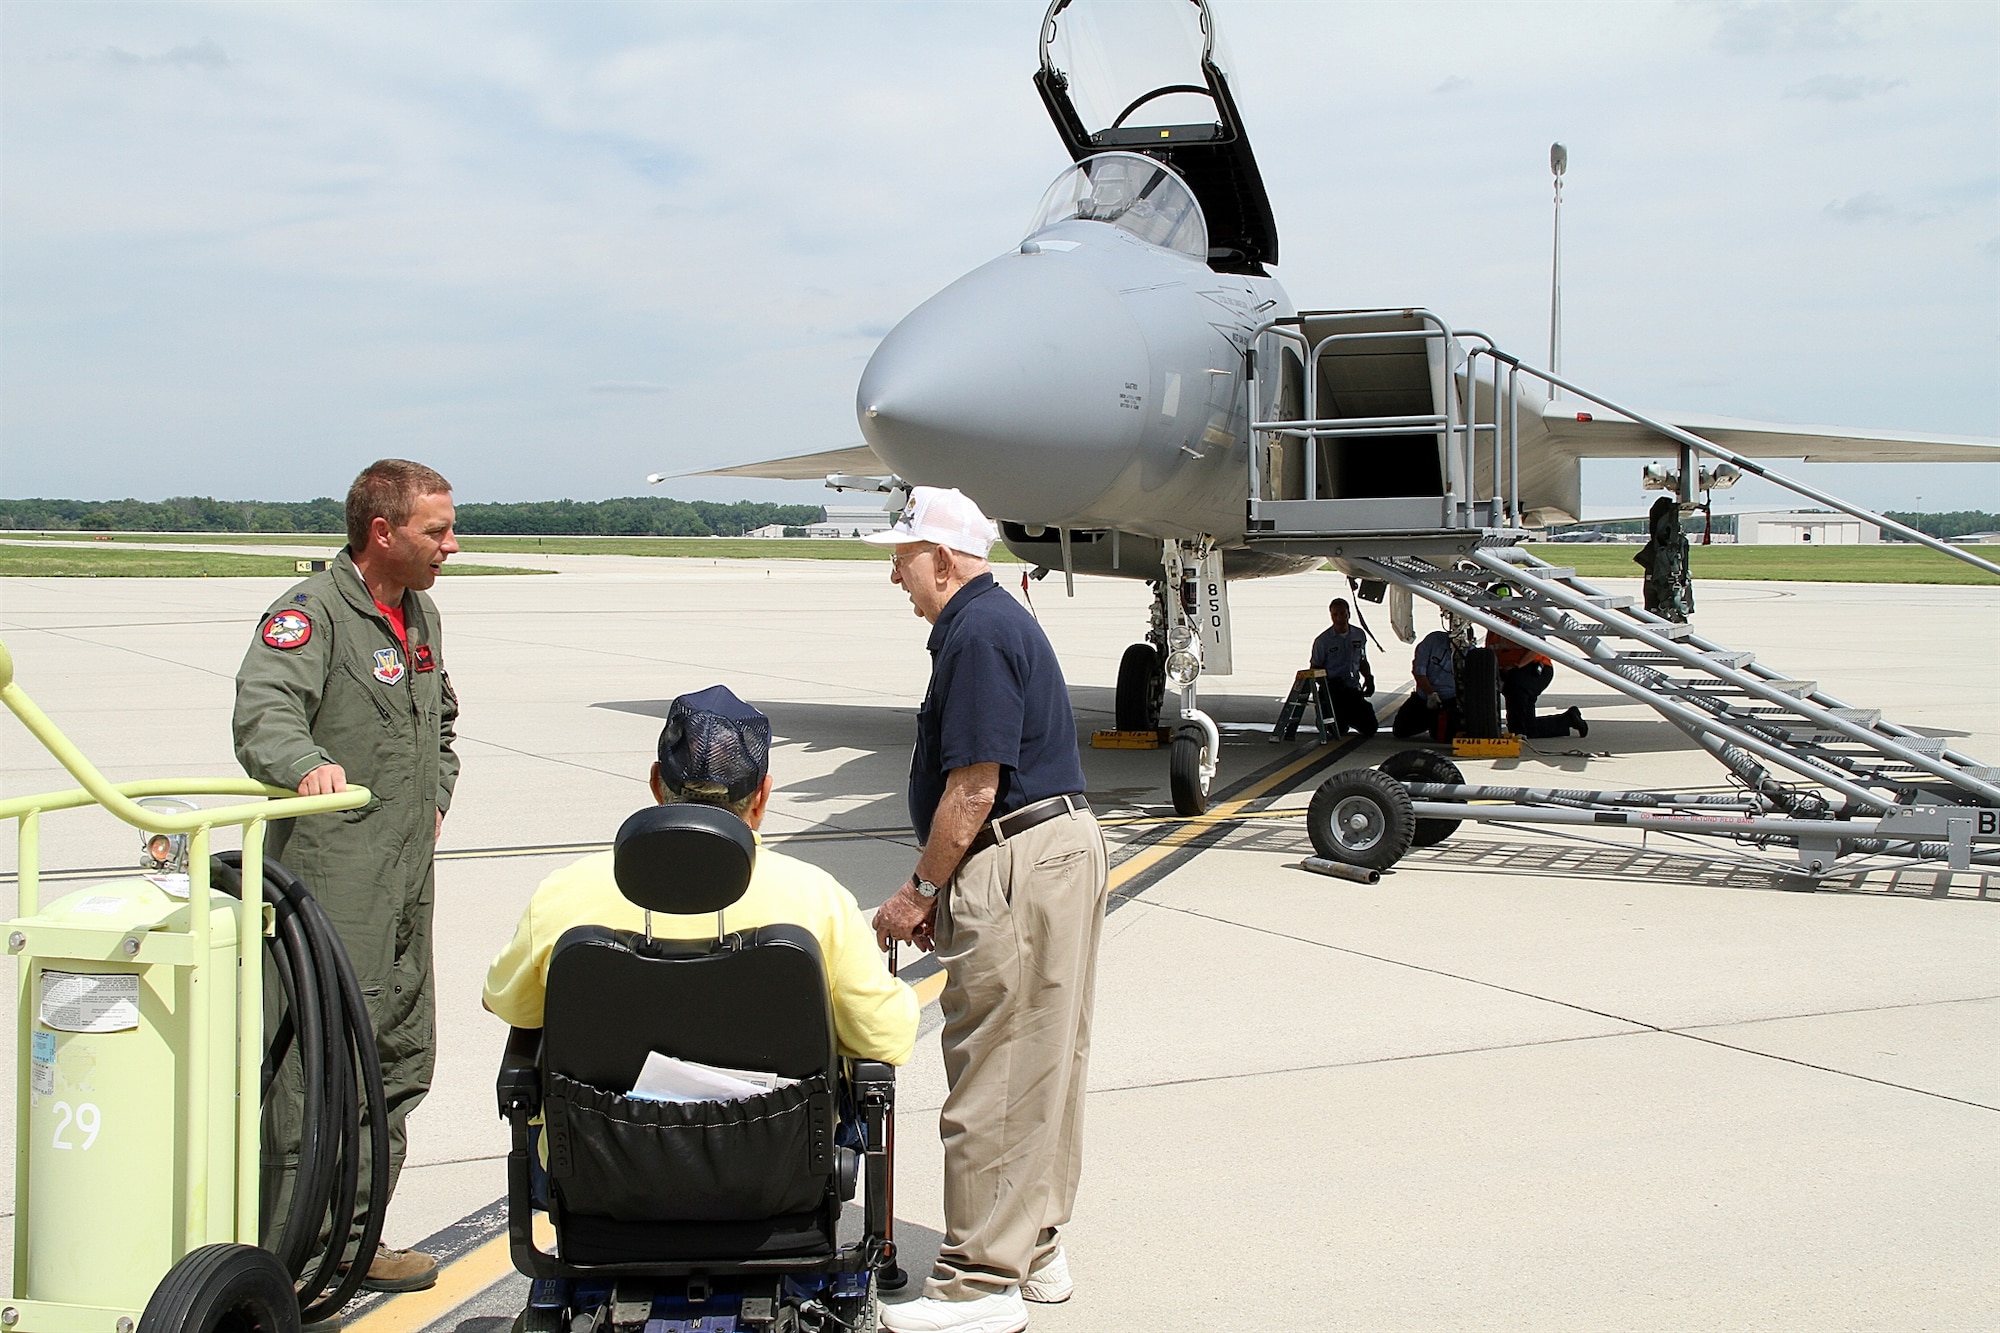 Lt. Col. Morris Fontenot Jr., 104th Operations Group, Barnes Air National Guard Base, chats July 25 with Bob Gobble of Beavercreek (seated), who worked from 1971 to 1992 on the F-15 and has served as a spokesperson for the Gathering of Eagles for 11 years, and Ed Horn of Pam beach Gardens, Fla. Horn, 89, was an F-15 consultant and worked at Wright-Patterson AFB for 30 years after serving as a B-26 bomber pilot during WWll and being held as a prisoner of war in Germany and Poland. (Skywrighter photo by Kathy Tyler)